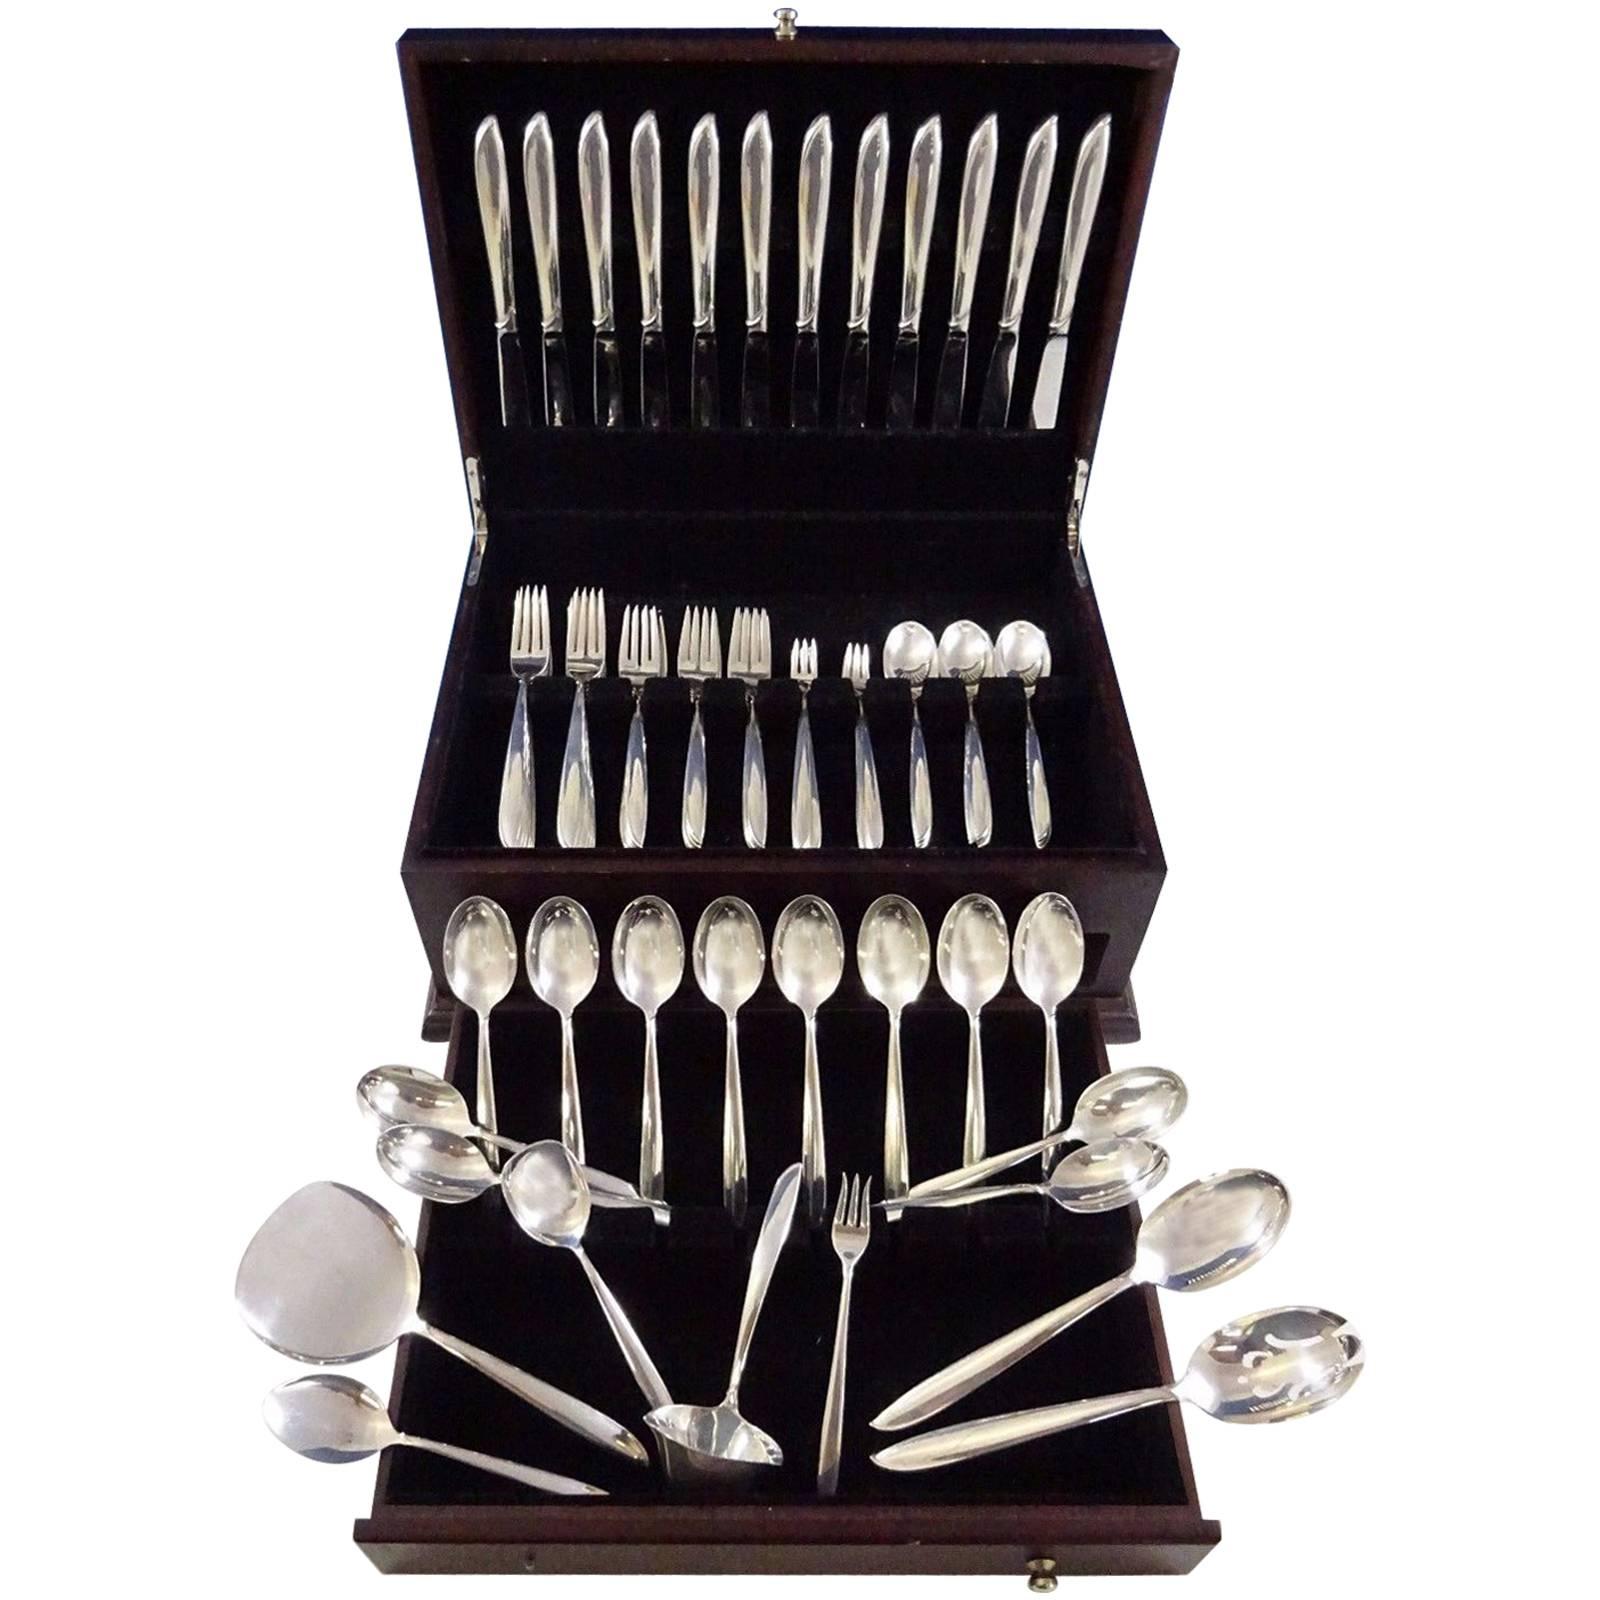 Mid-Century Modern Silver Rhythm by International sterling silver flatware set, 79 pieces. This set includes:

12 knives, 9 1/4